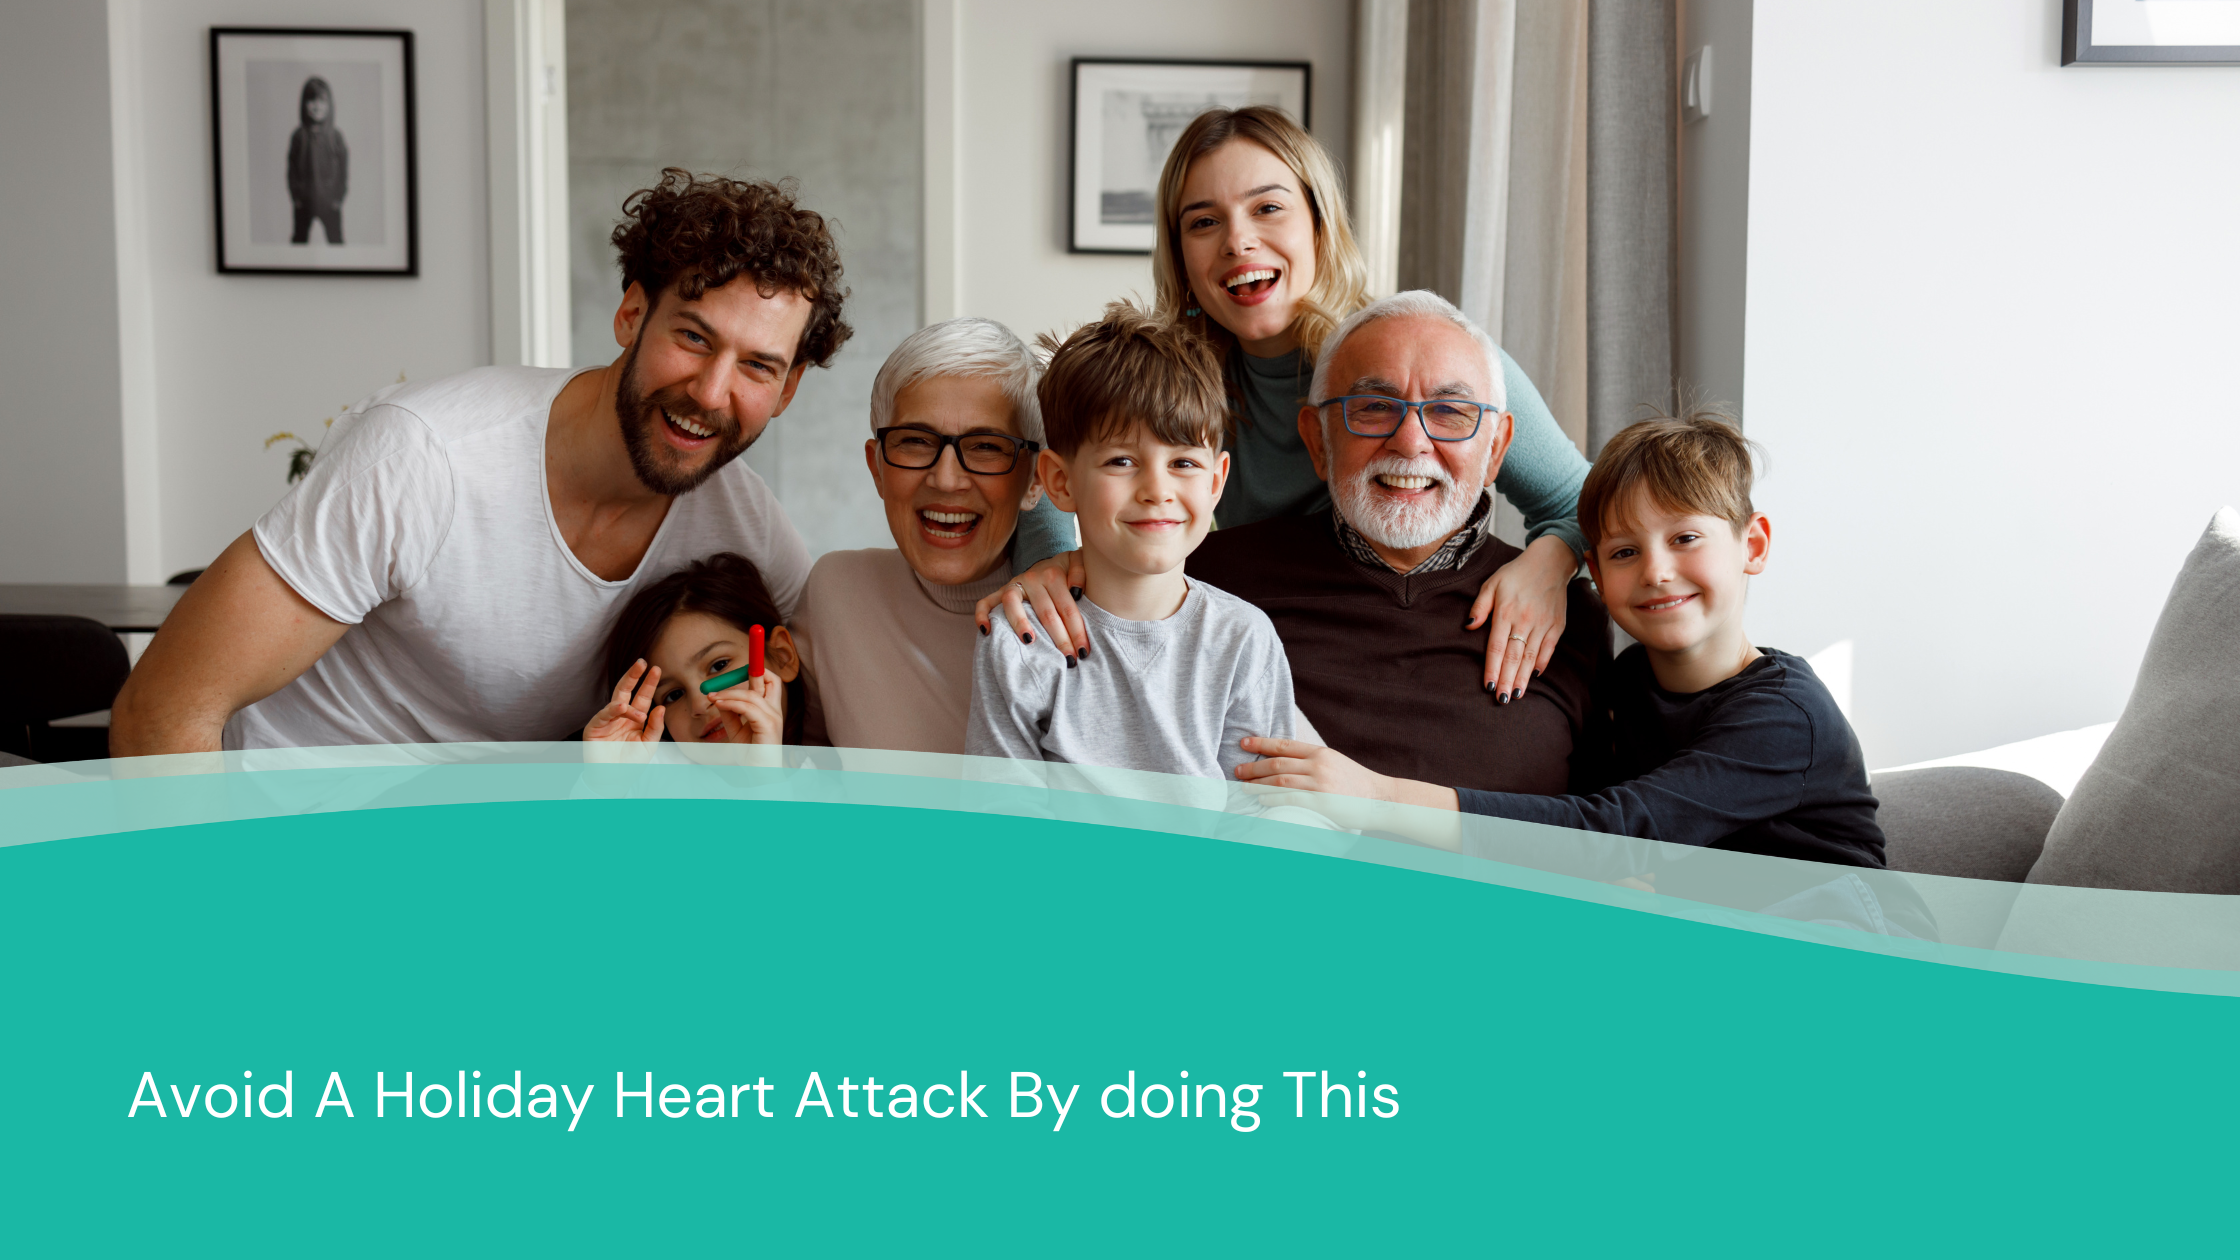 Avoid A Holiday Heart Attack By doing This